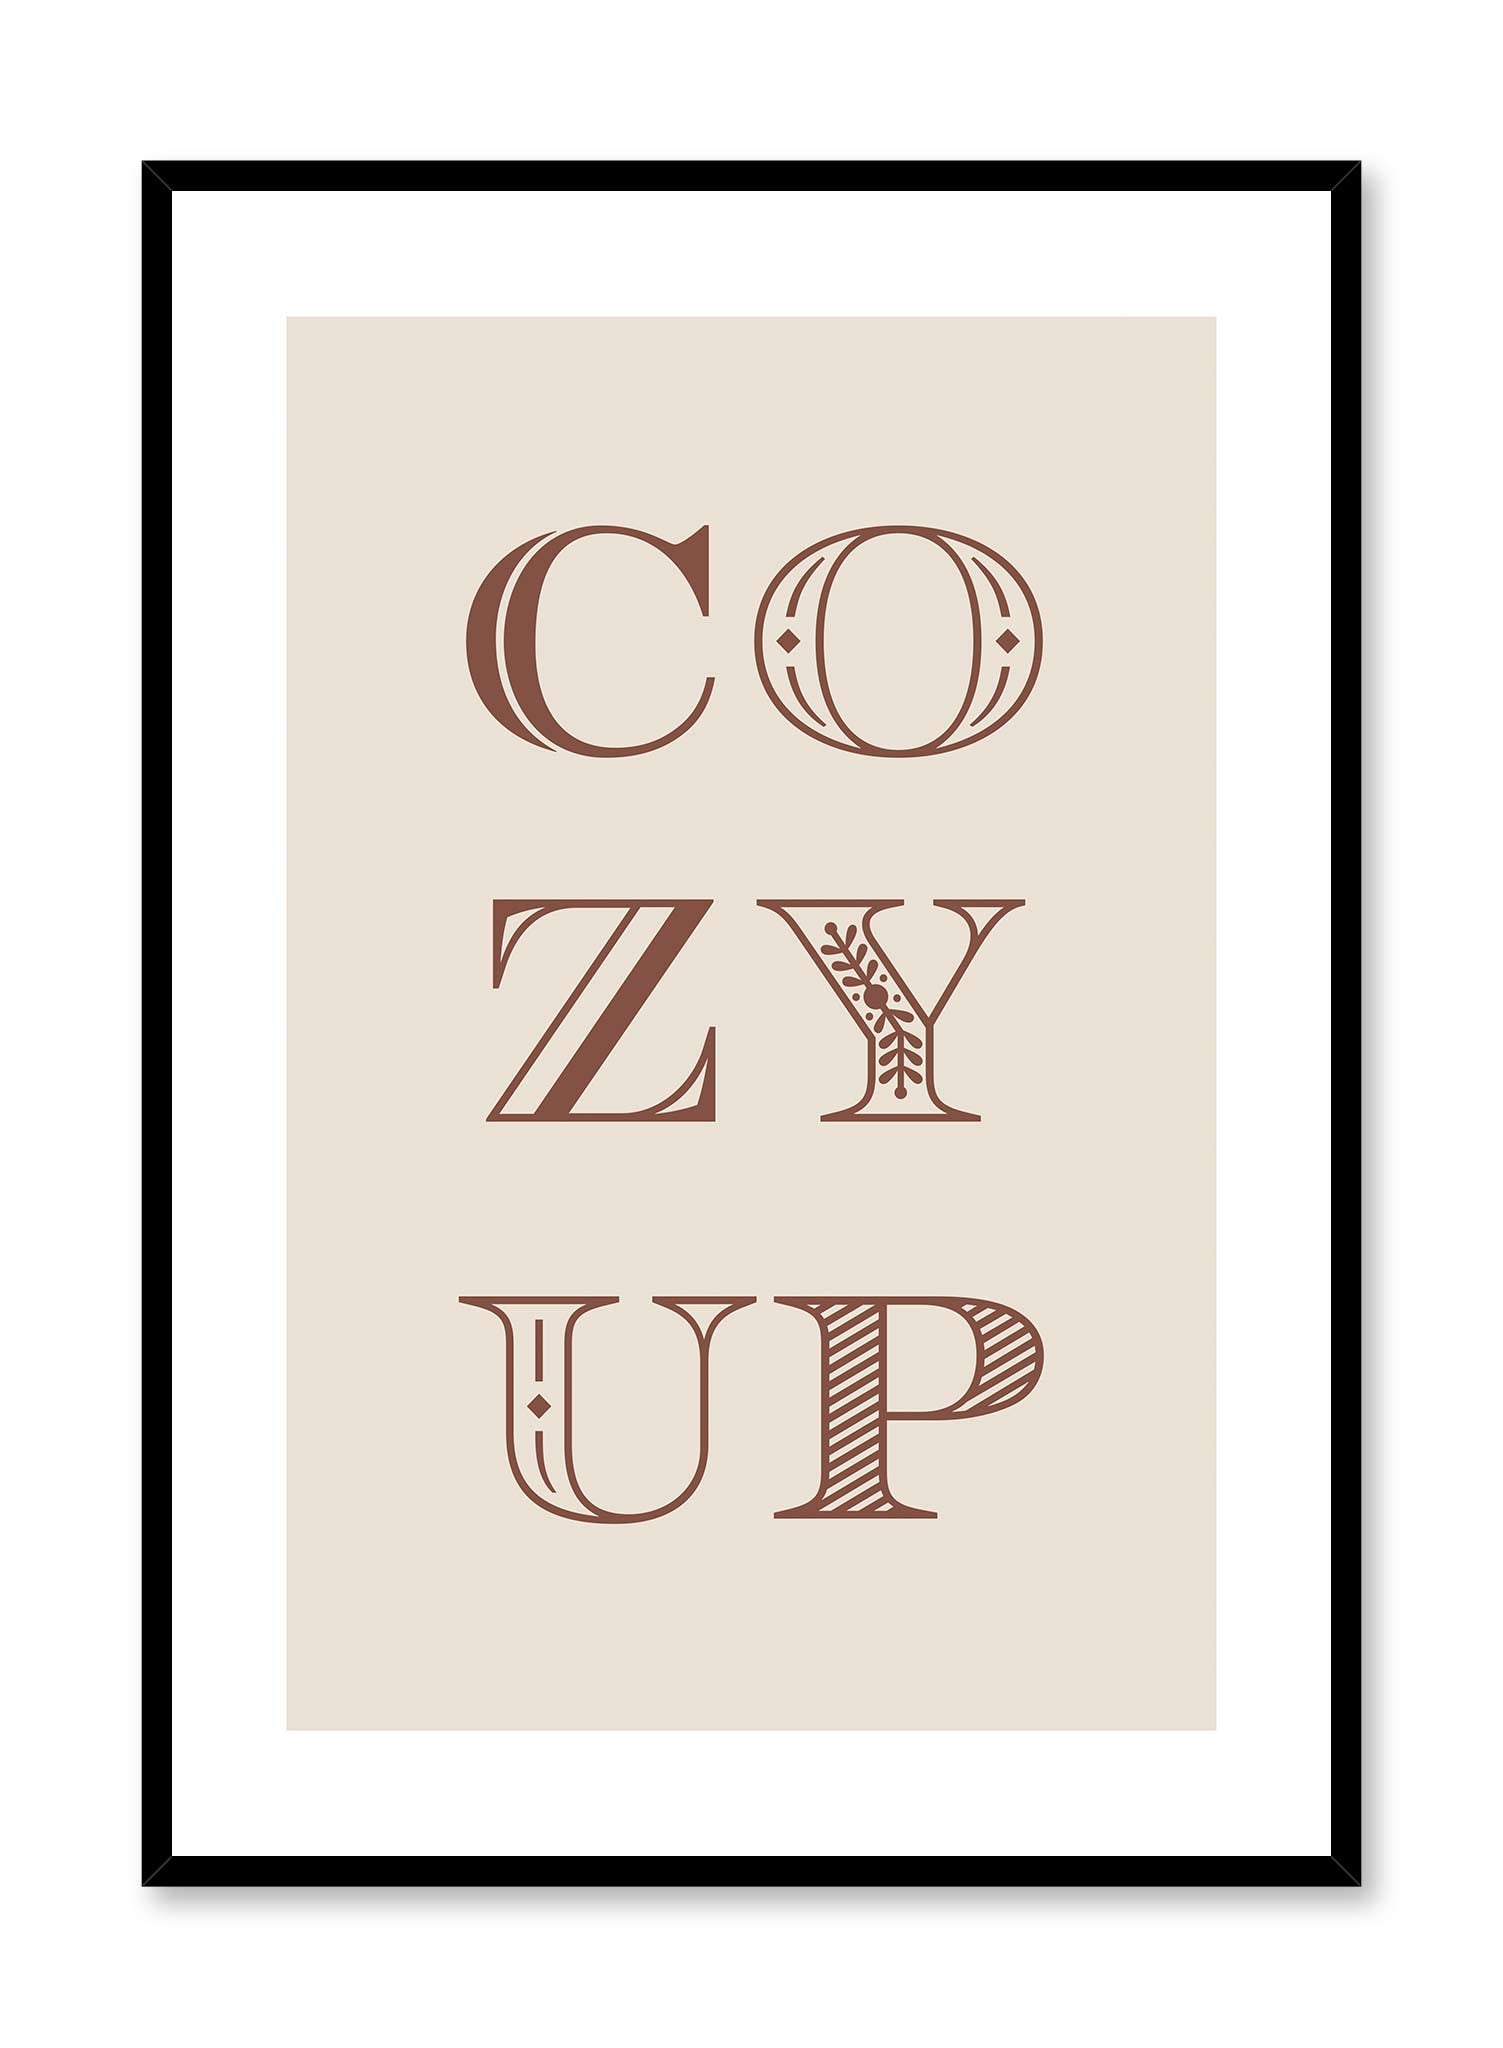 Cozying Up, Poster | Oppositewall.com